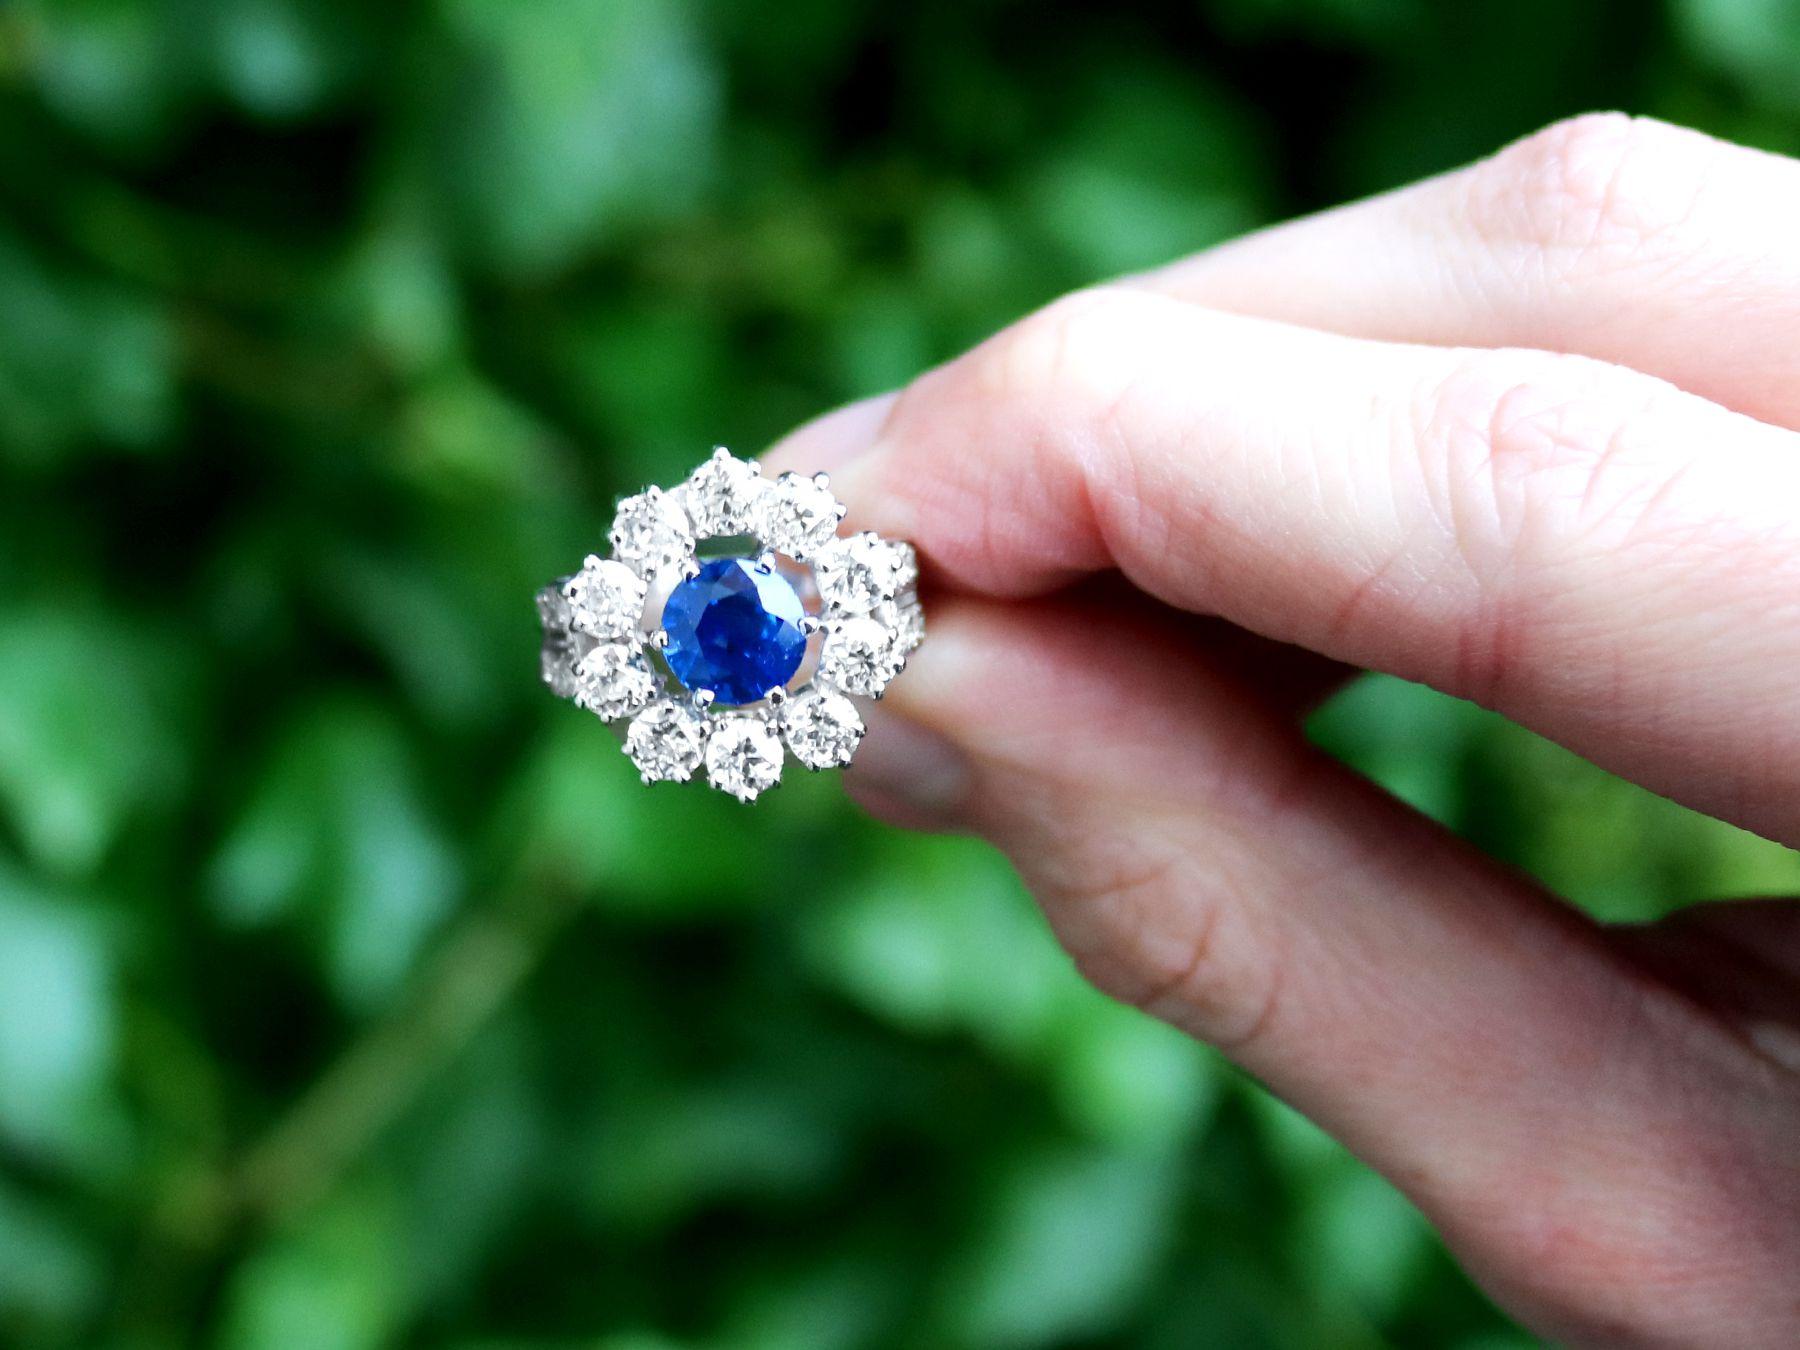 A stunning, fine and impressive 1.66 carat sapphire and 1.90 carat diamond platinum cluster ring; part of our diverse antique jewelry and estate jewelry collections.

This stunning and impressive vintage sapphire and diamond cluster ring has been